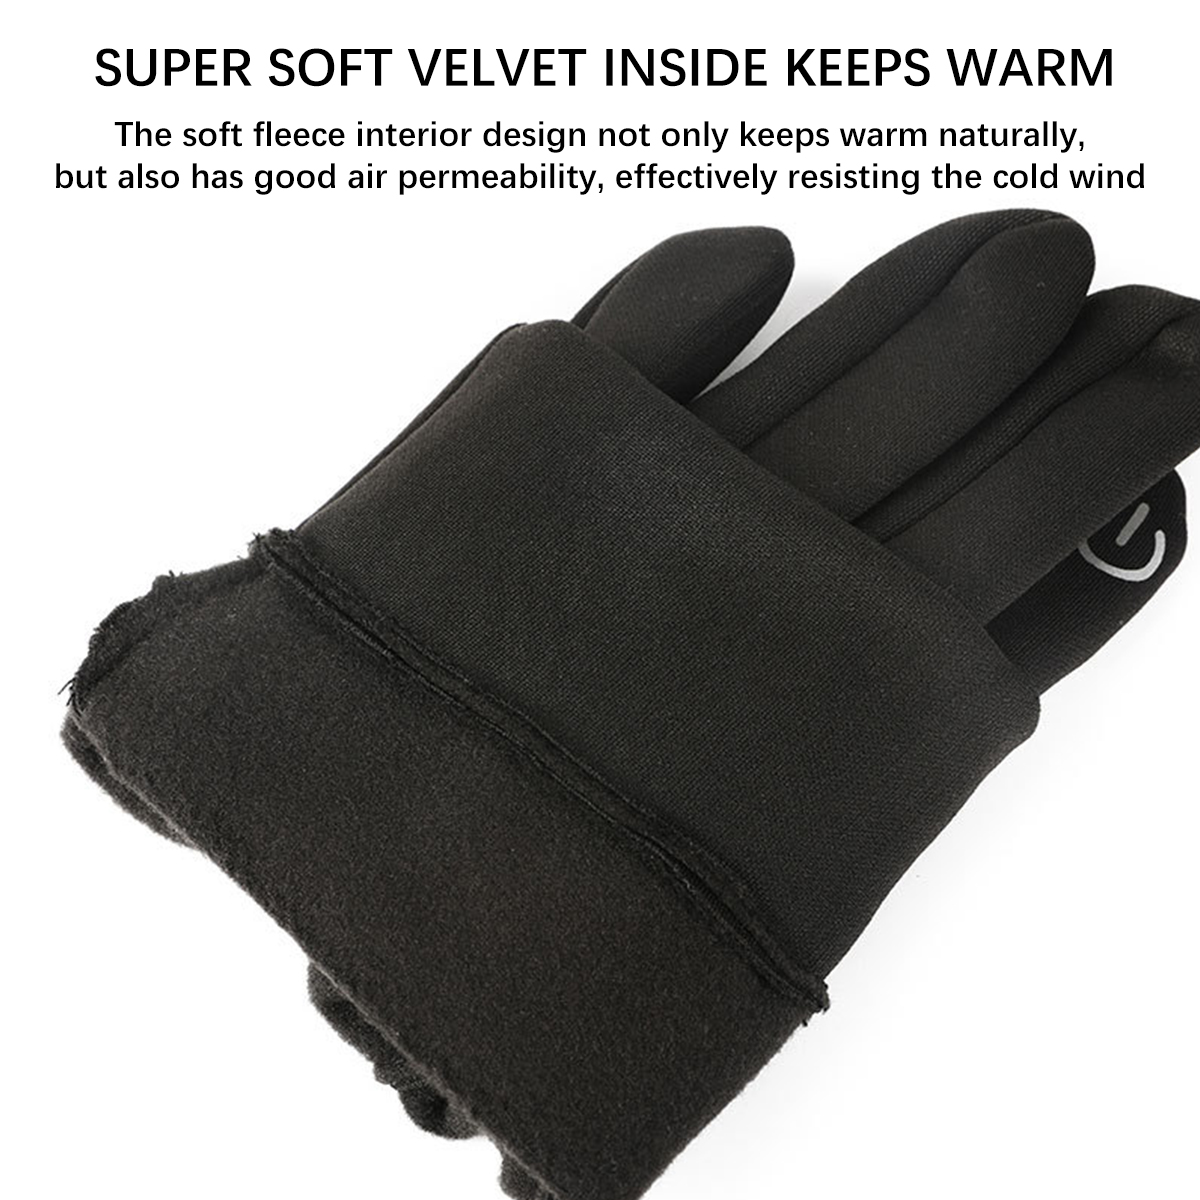 Winter-Warm-Touch-Screen-Thermal-Gloves-Ski-Snow-Snowboard-Cycling-Waterproof-Windproof-Gloves-1923176-2